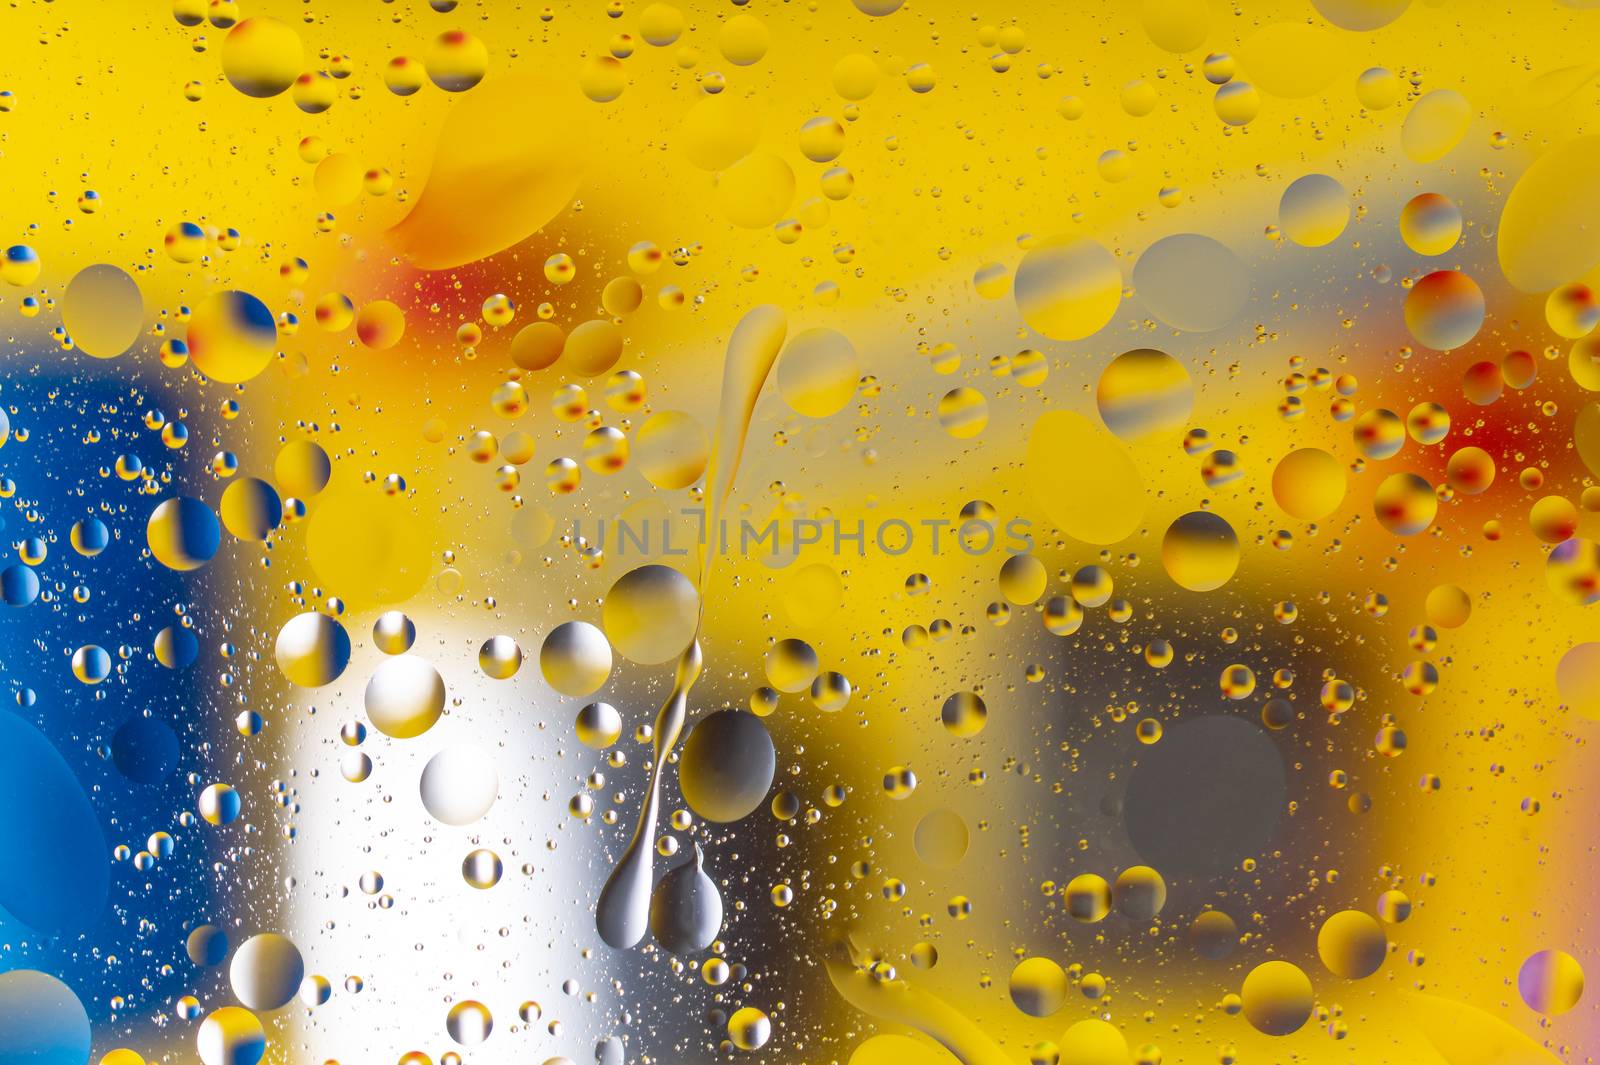 The hue abstract composition with oil drops in water. Yellow, blue, white colors.